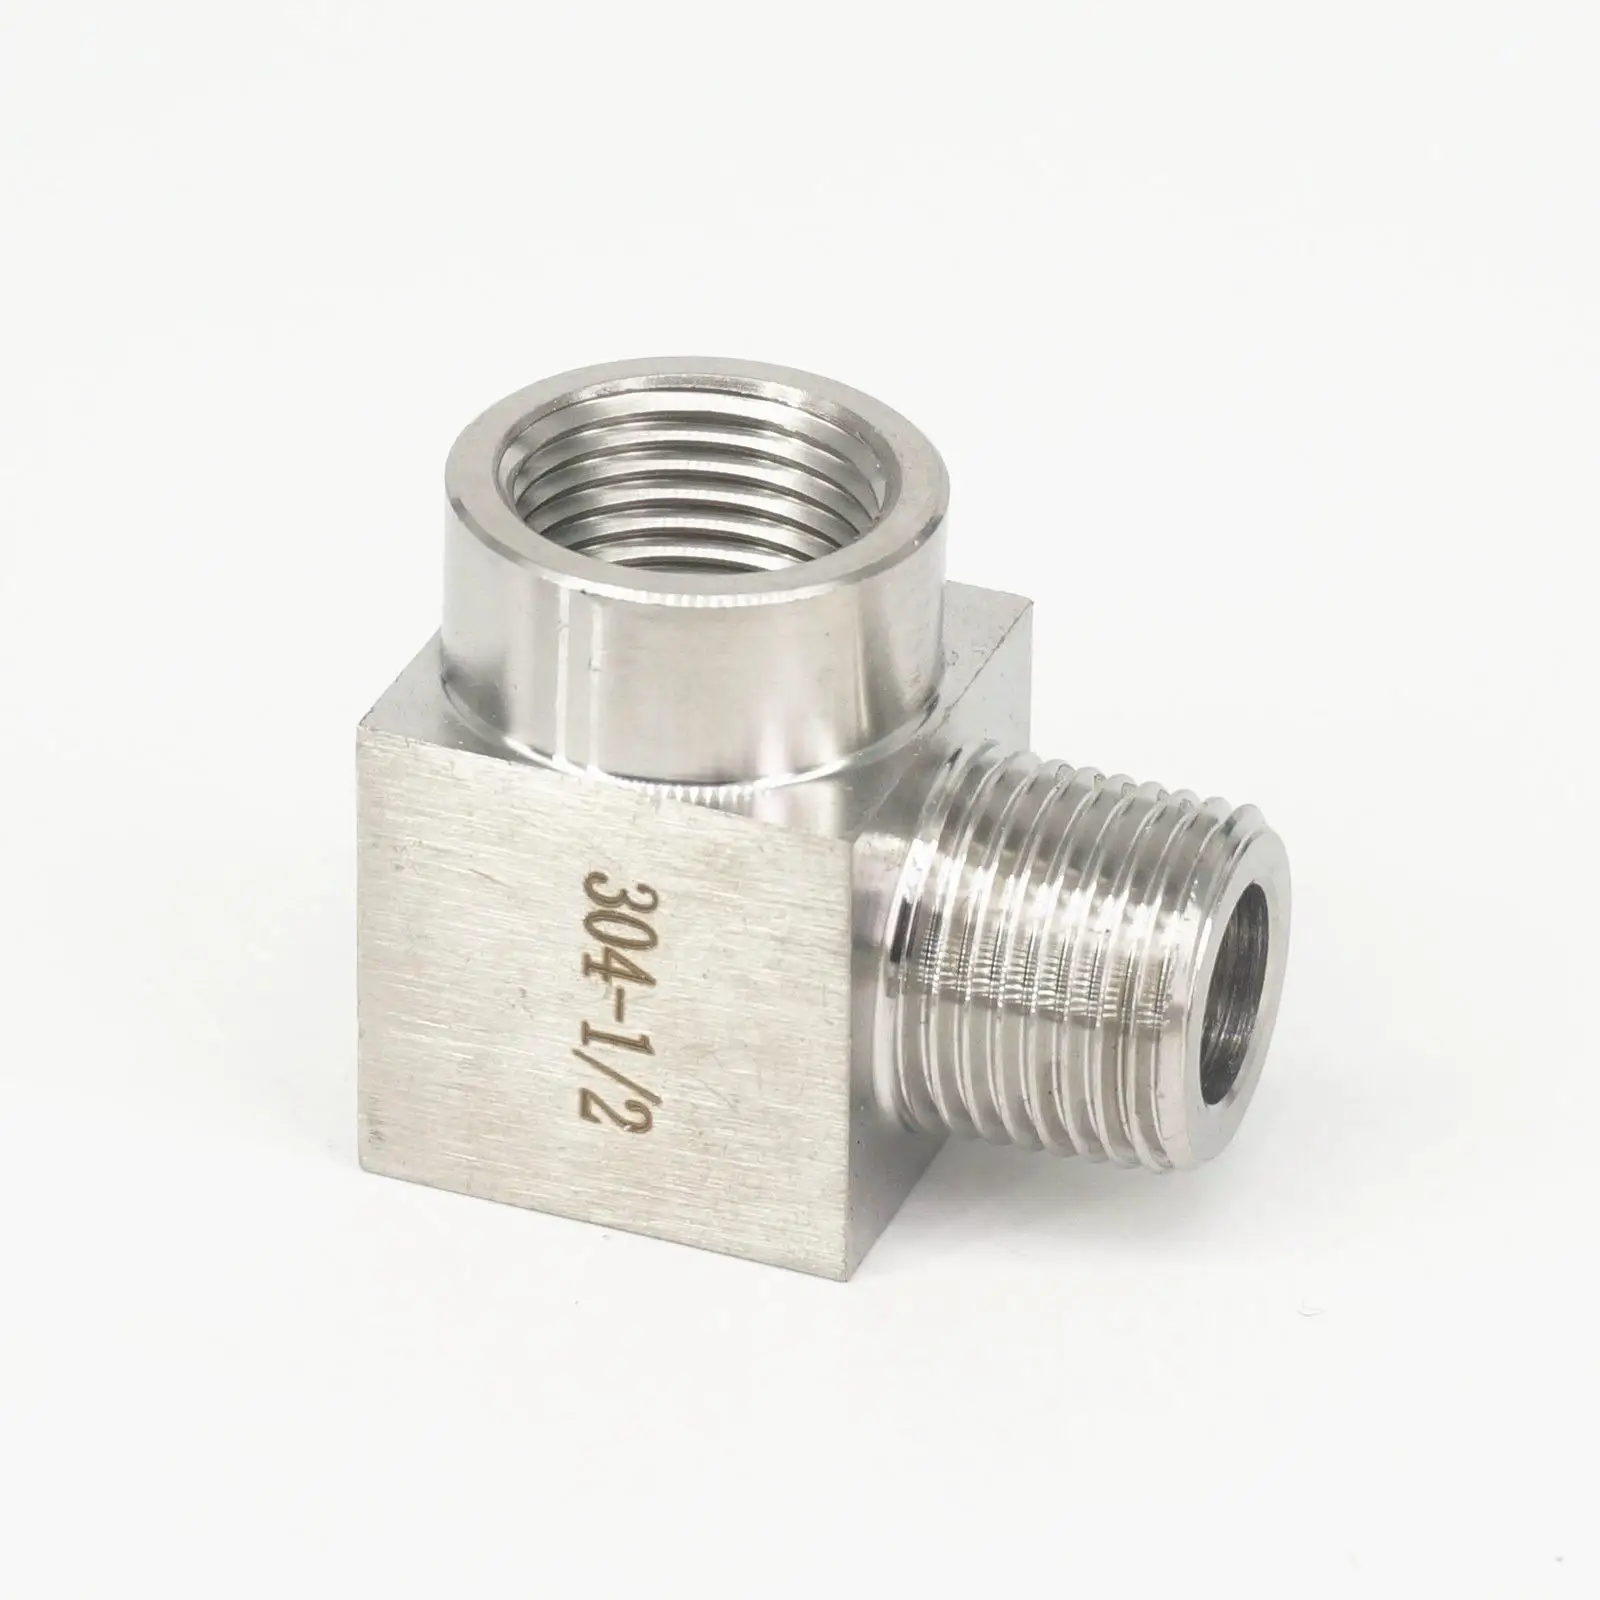 BSP Extended Fittings 4,000 PSI Rated Male-Female Bsp Stainless steel adaptors 